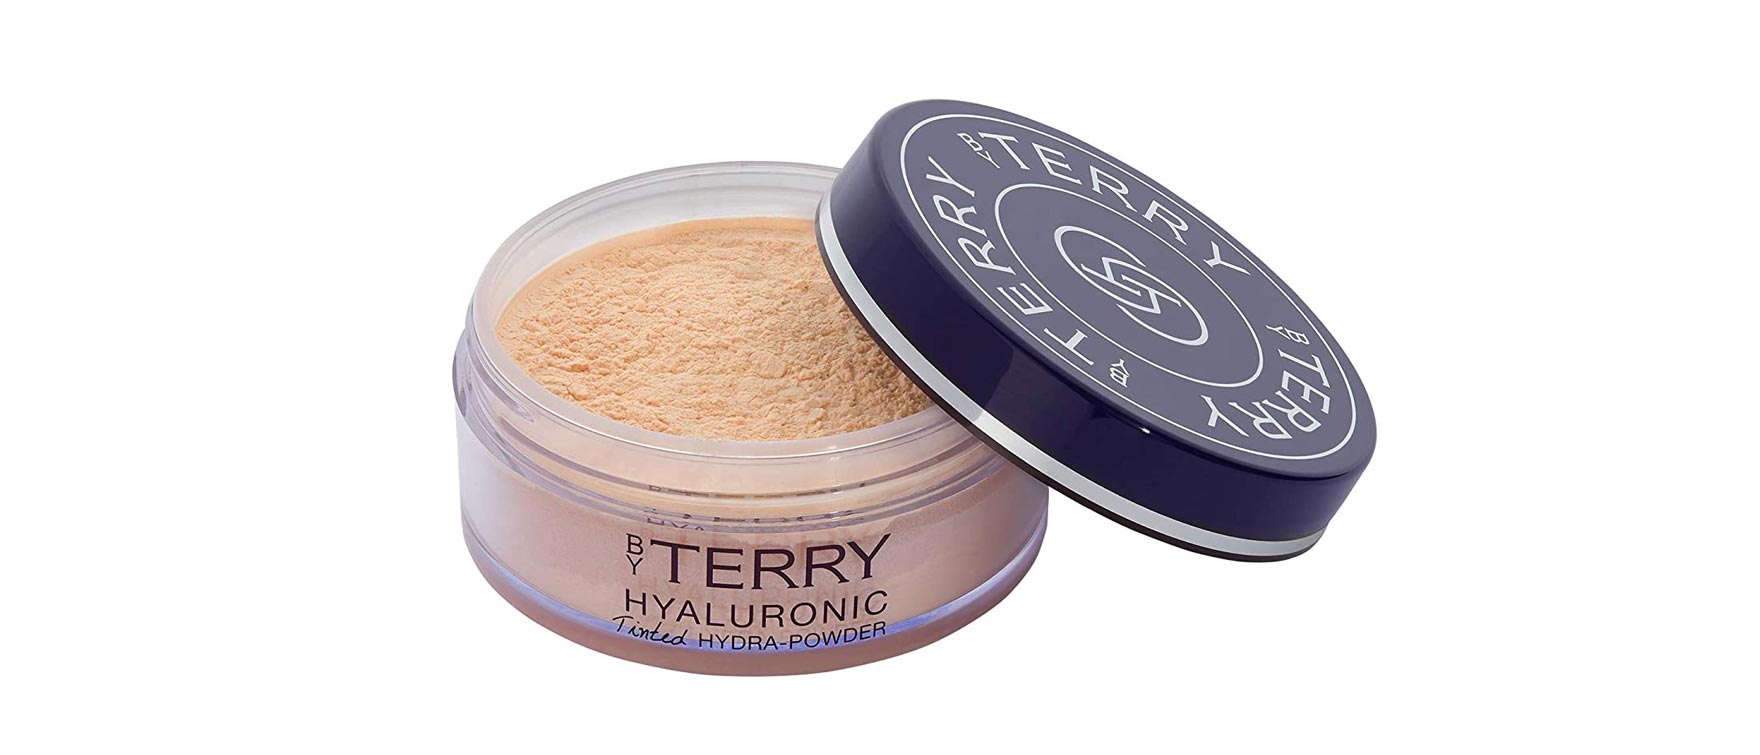 13. By Terry Hyaluronic Hydra Powder